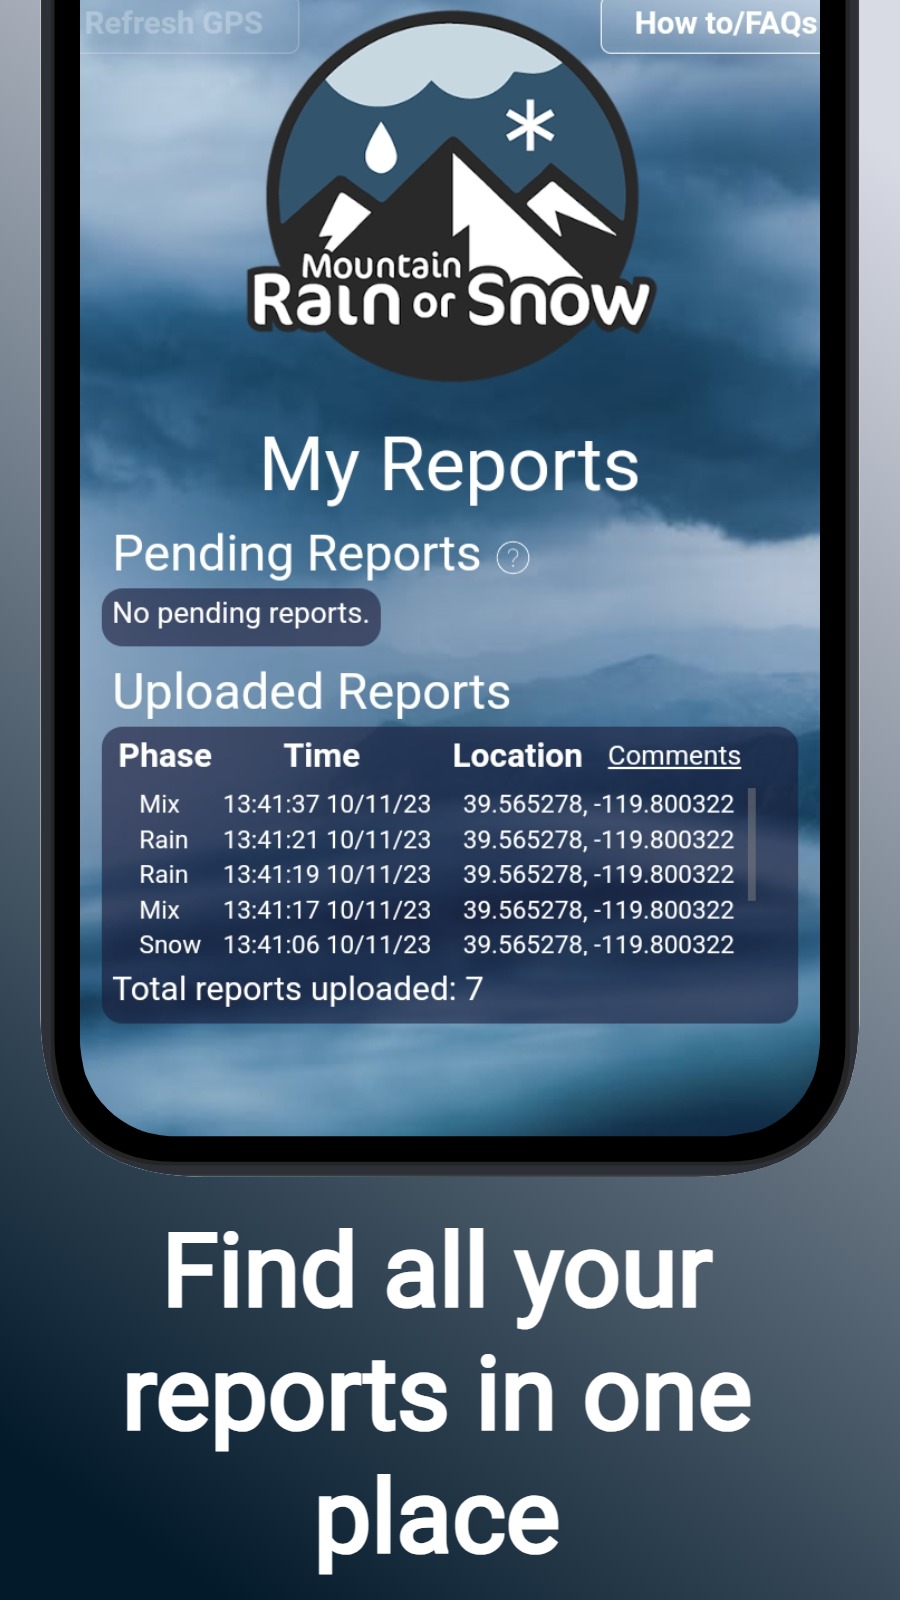 Find all your reports in one place